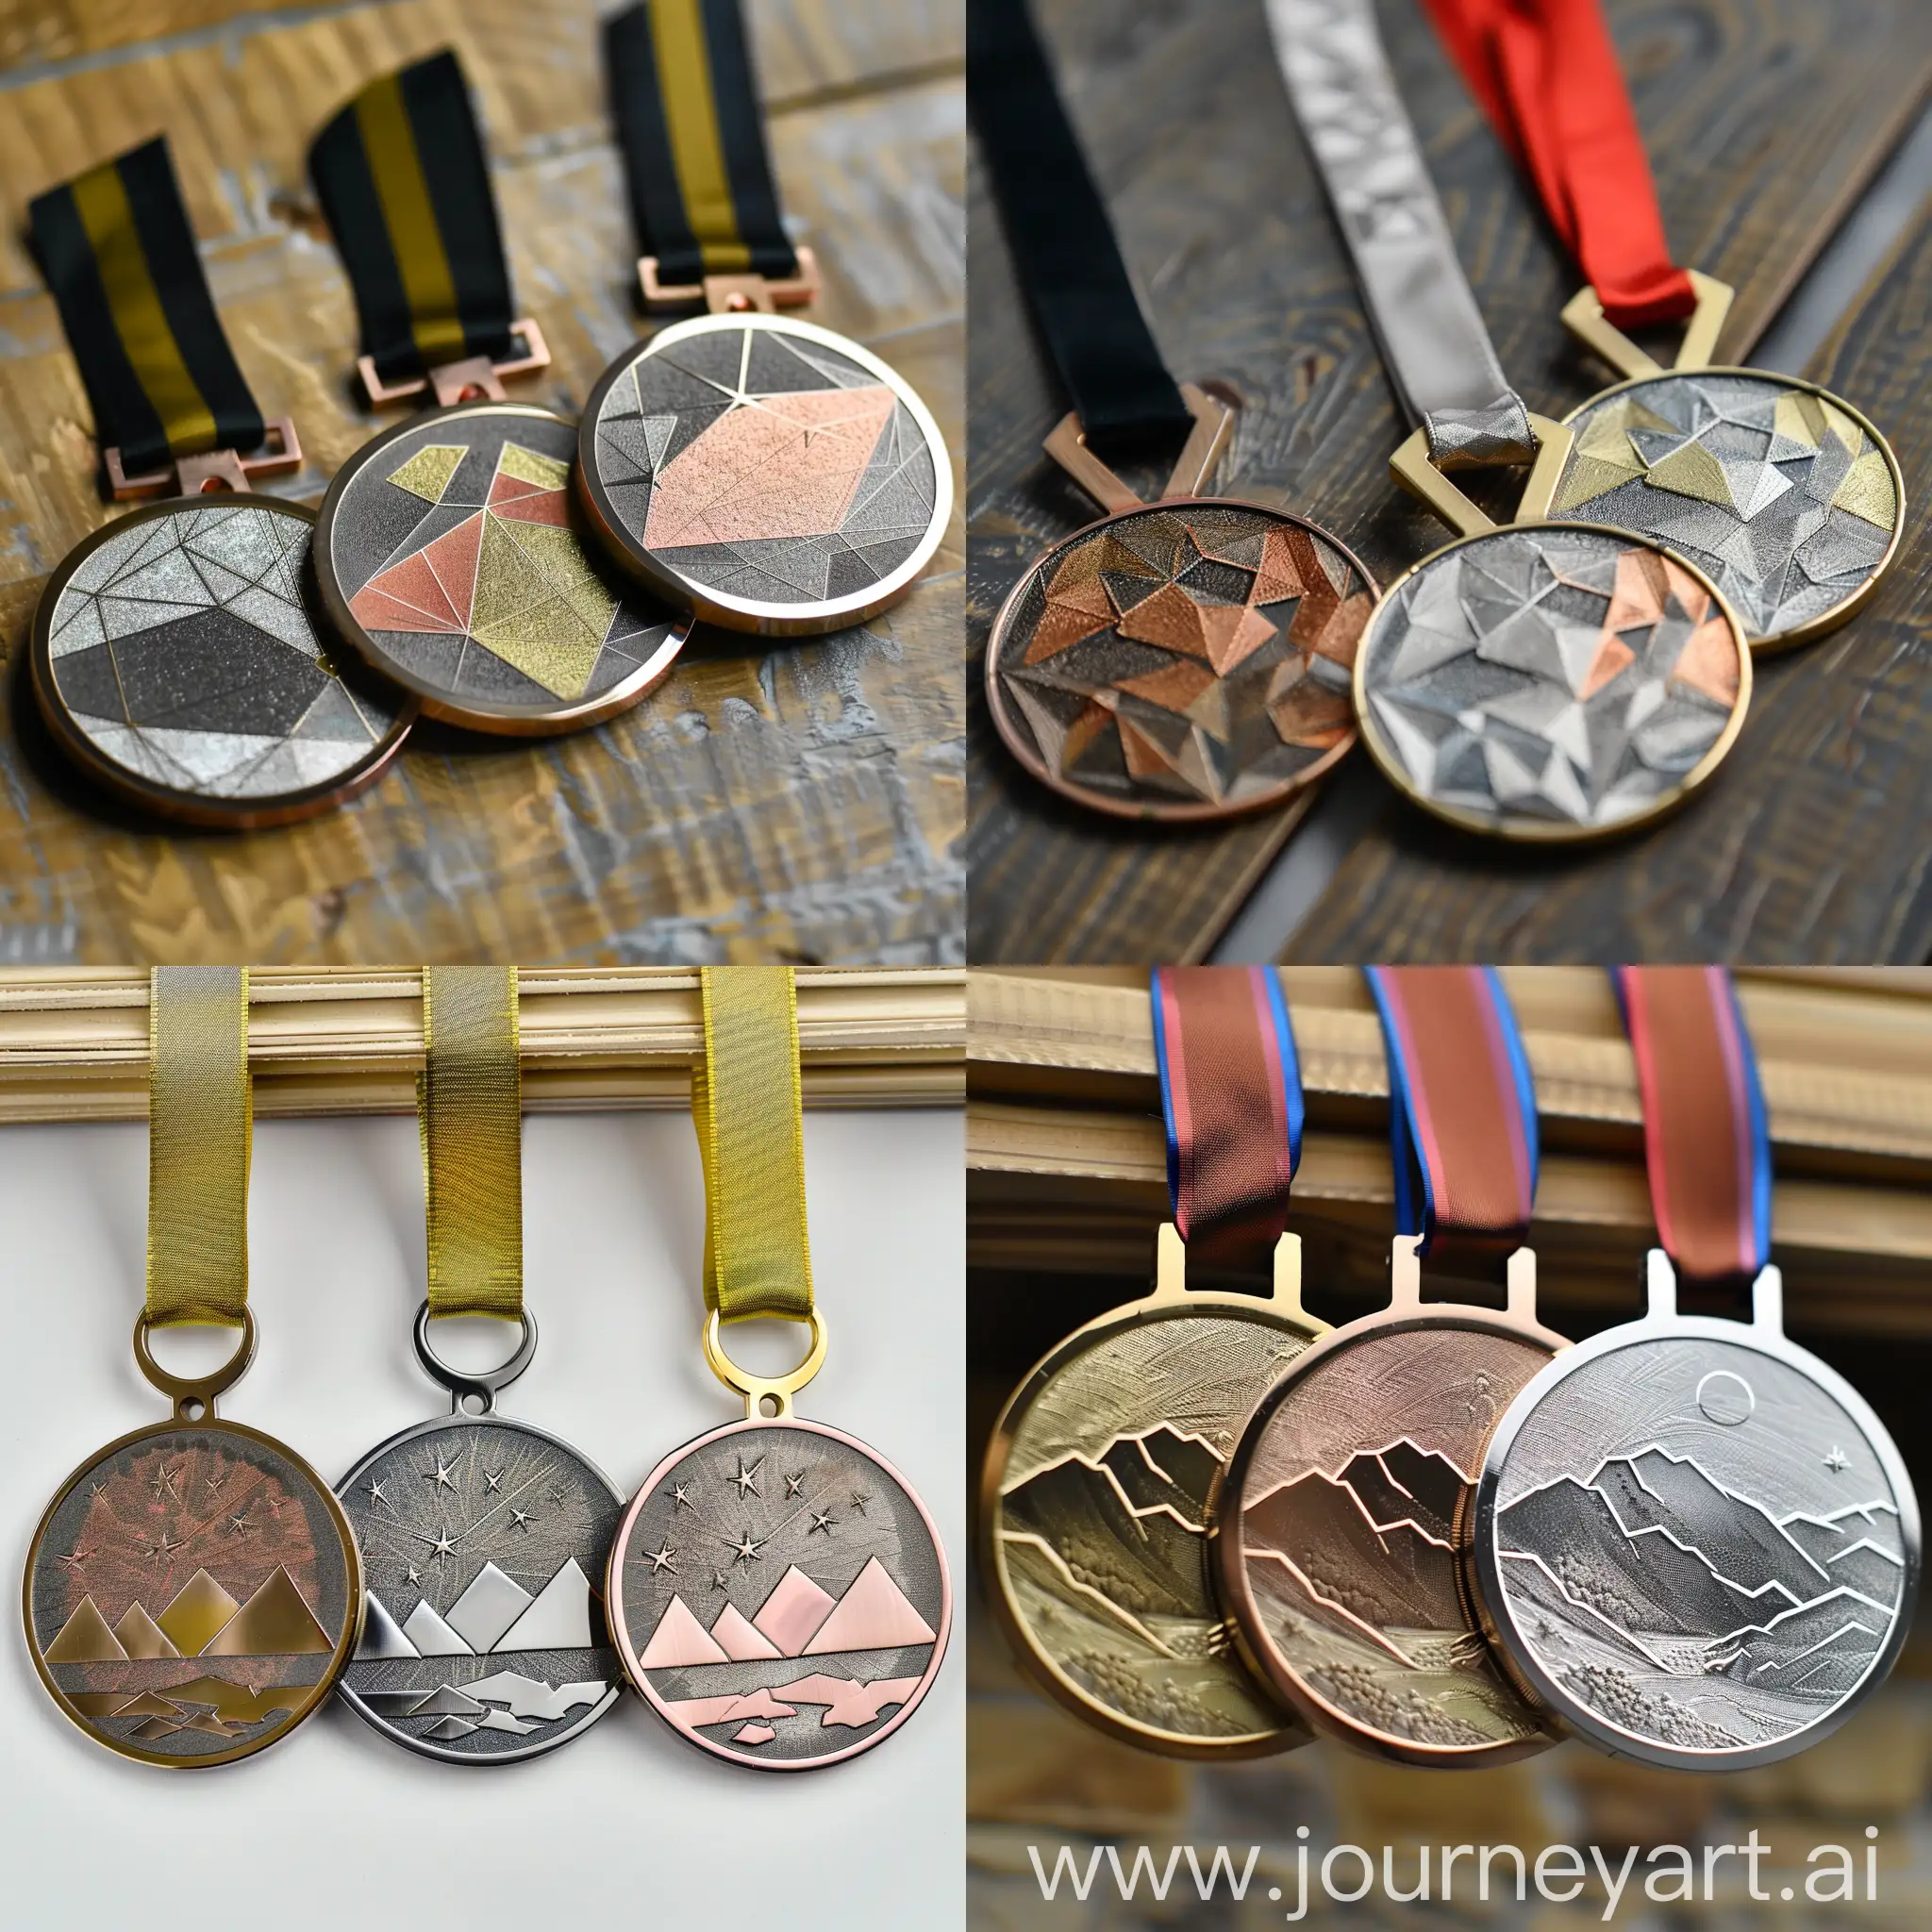 Geometric-Shapes-CrossCountry-Race-Medals